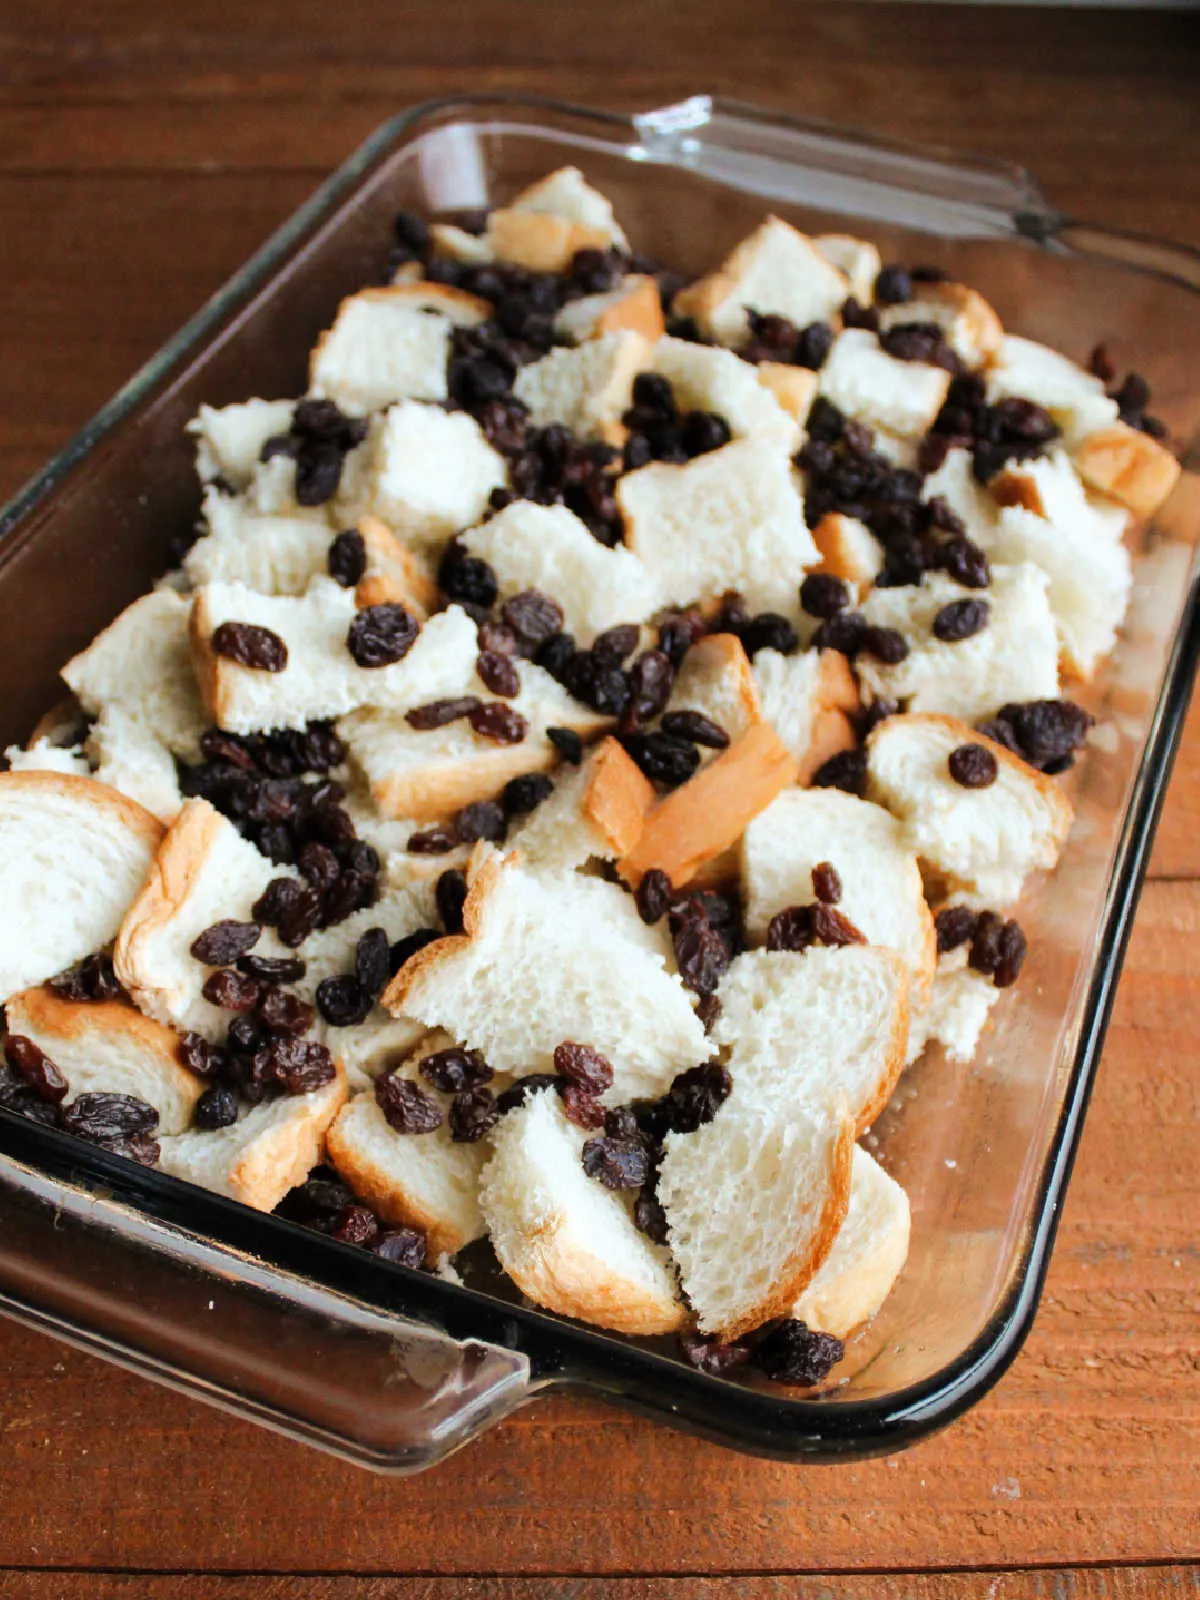 Cubes of stale bread and raisins in 9x13-inch pan.